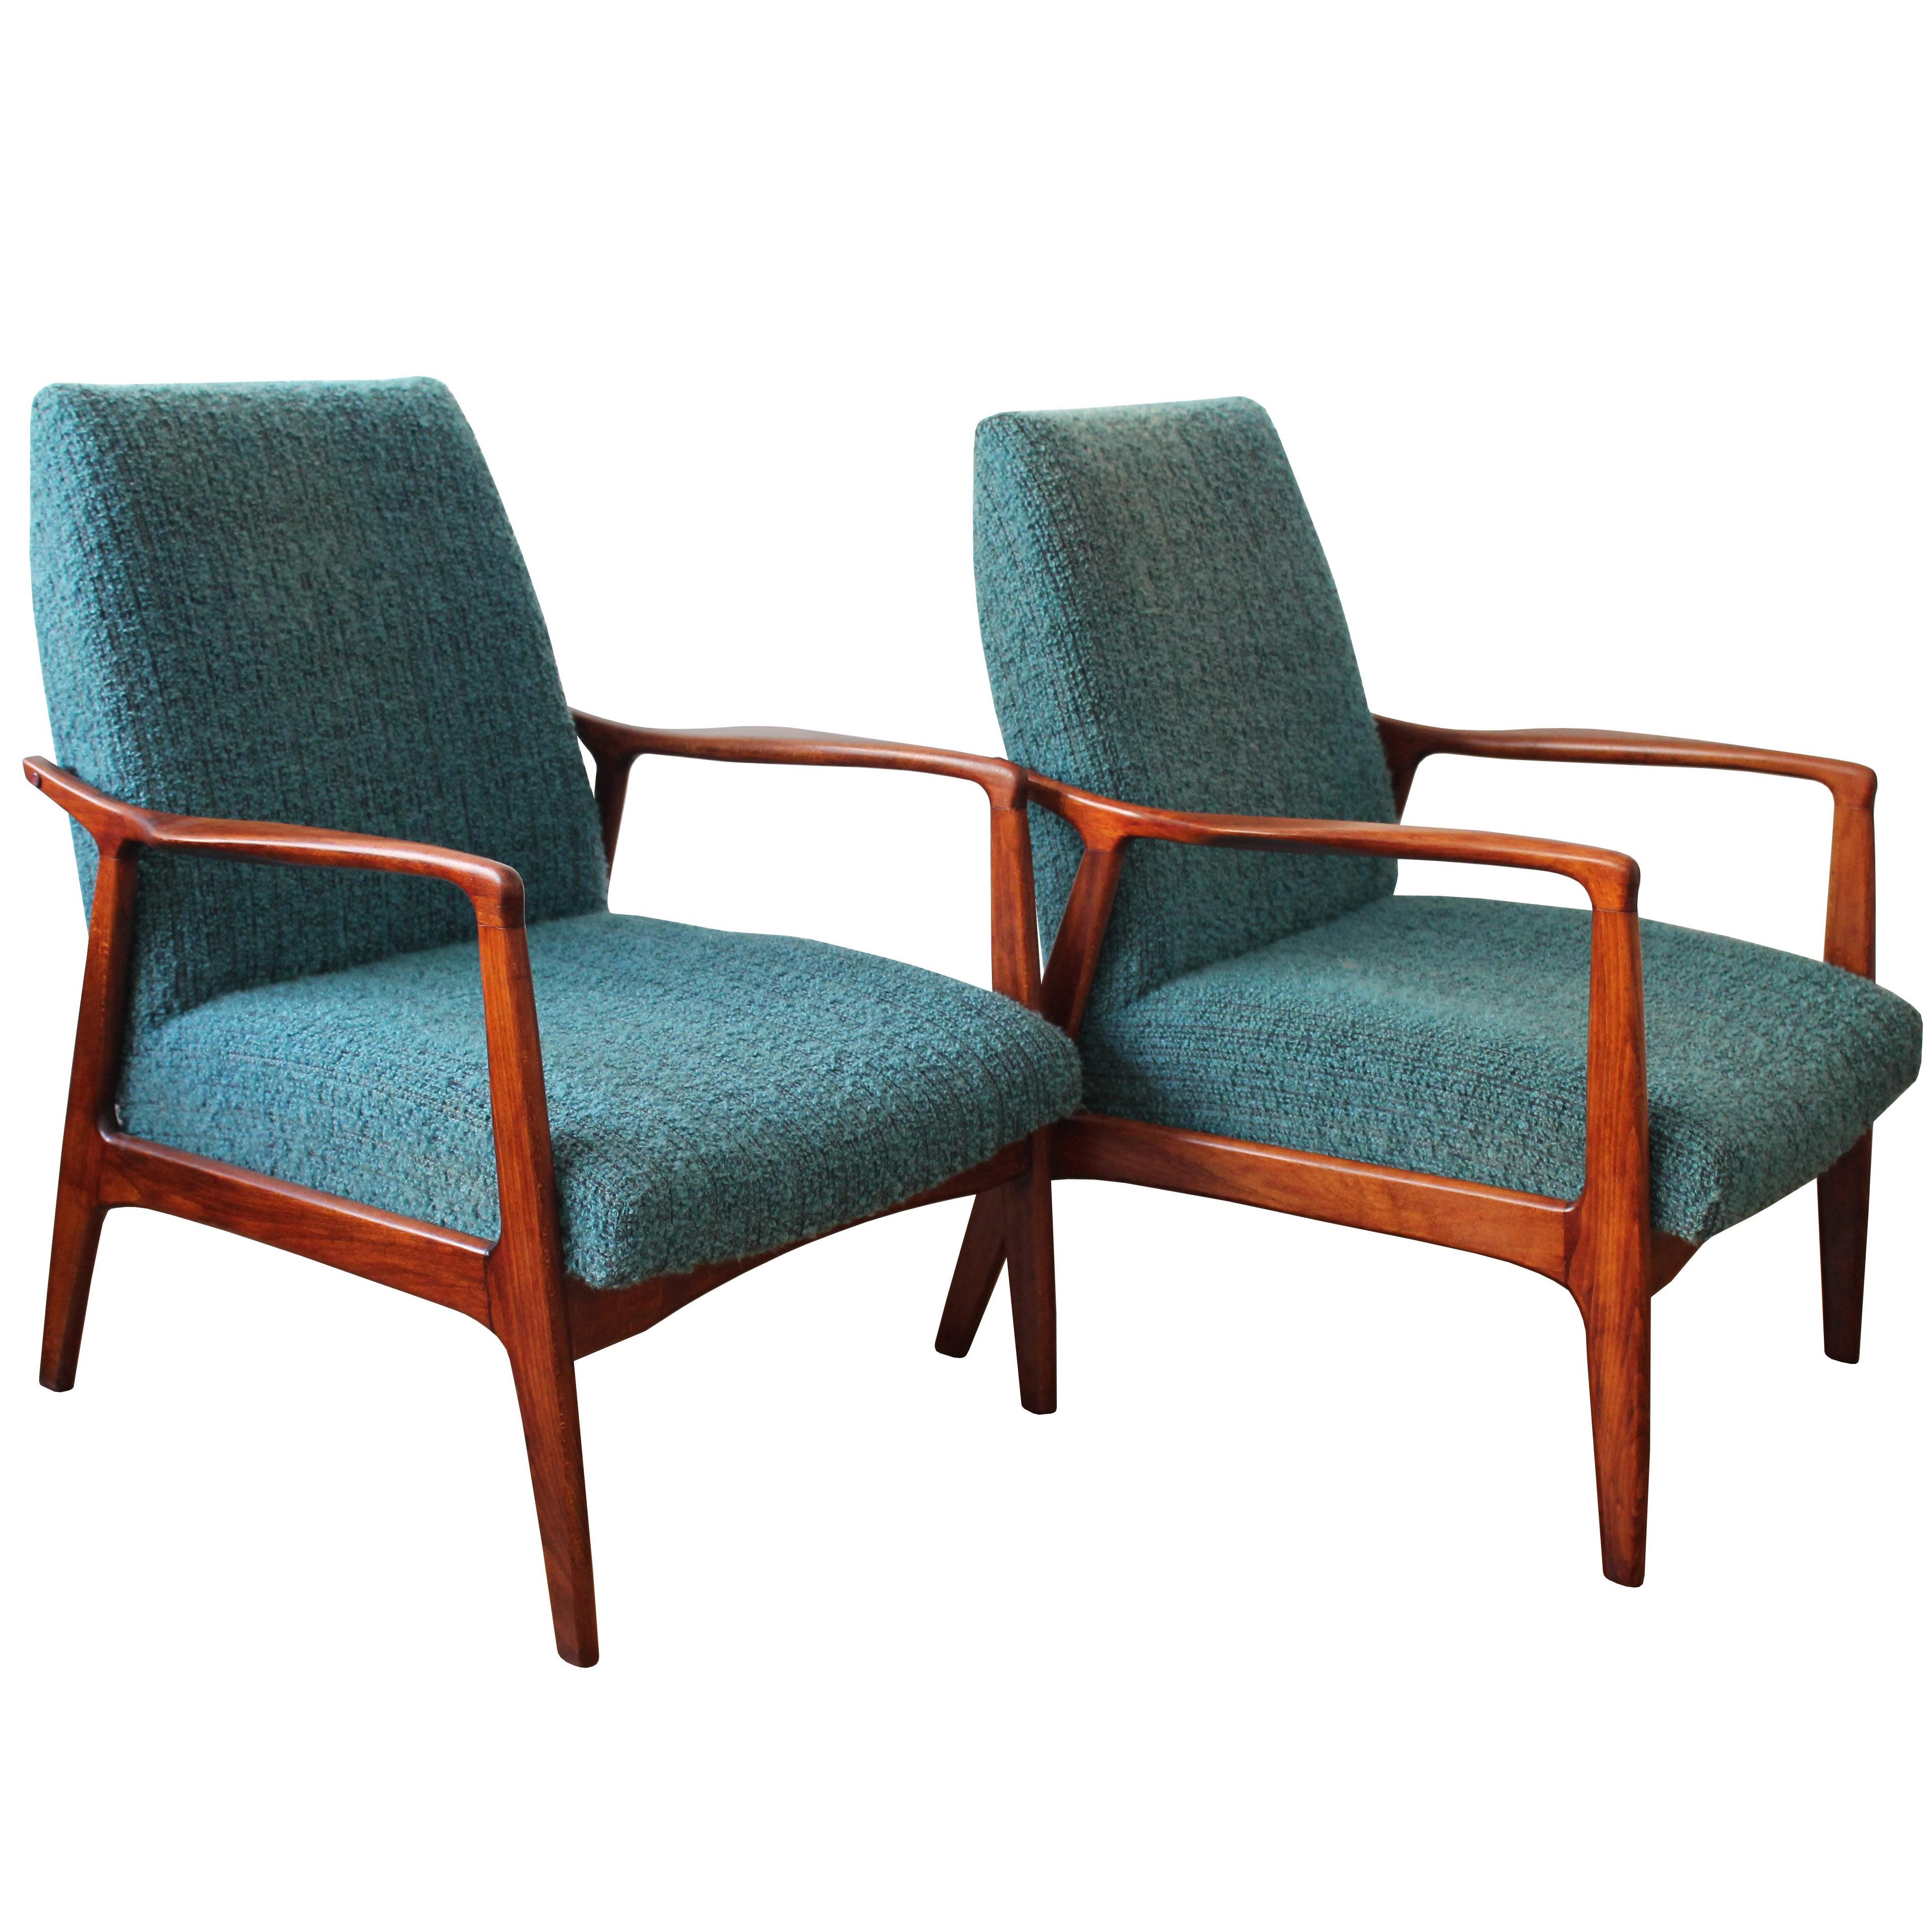 Set of two Midcentury Armchairs